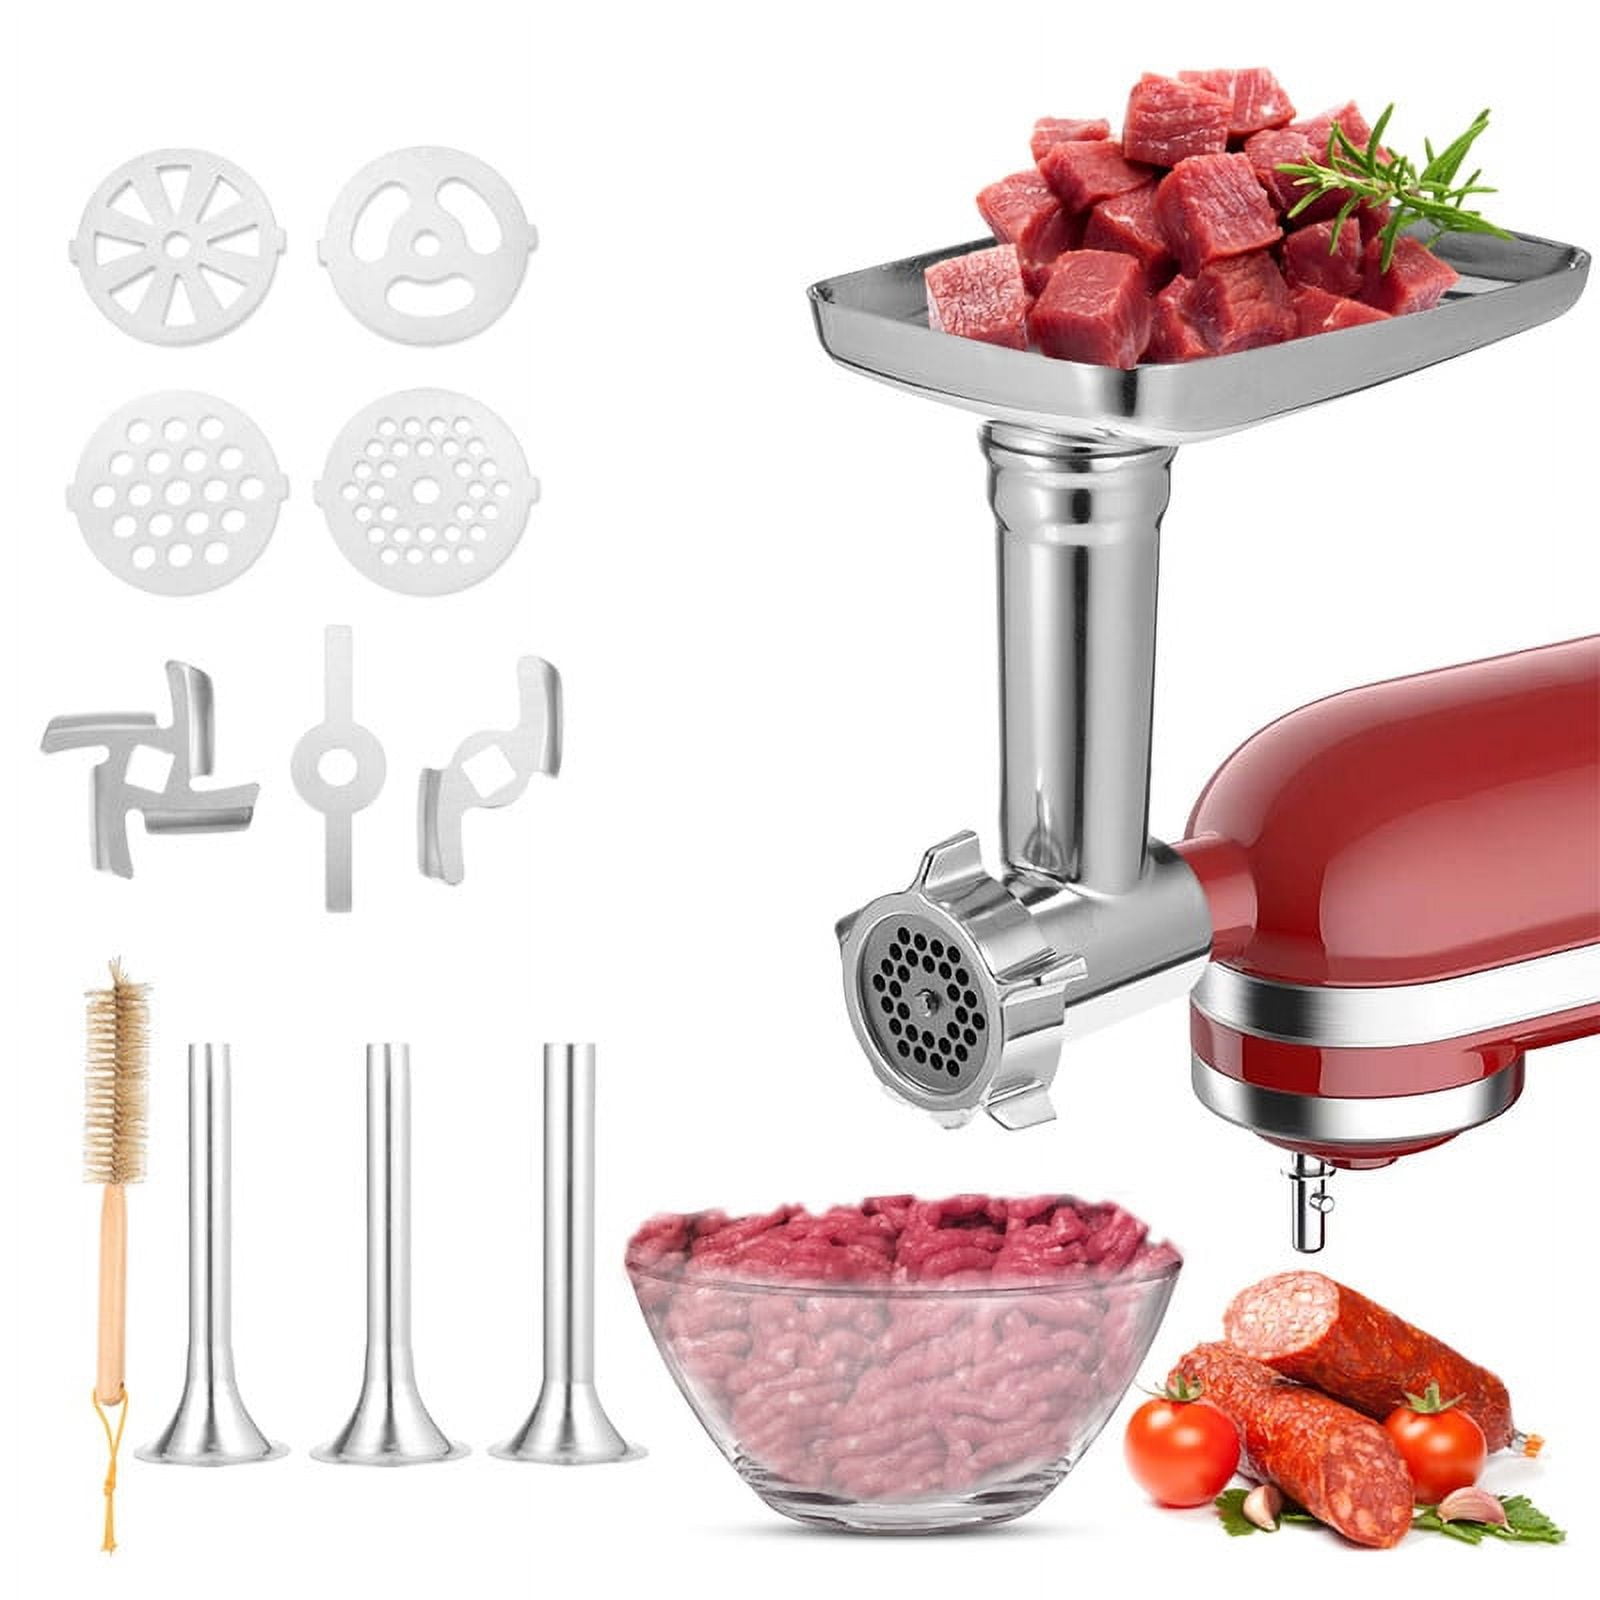 Farberware Meat Grinder, Slice and Shred, and Pasta Maker Stand Mixer  Attachments, 3 pc set #Ad #Slice, #Sponsored, …